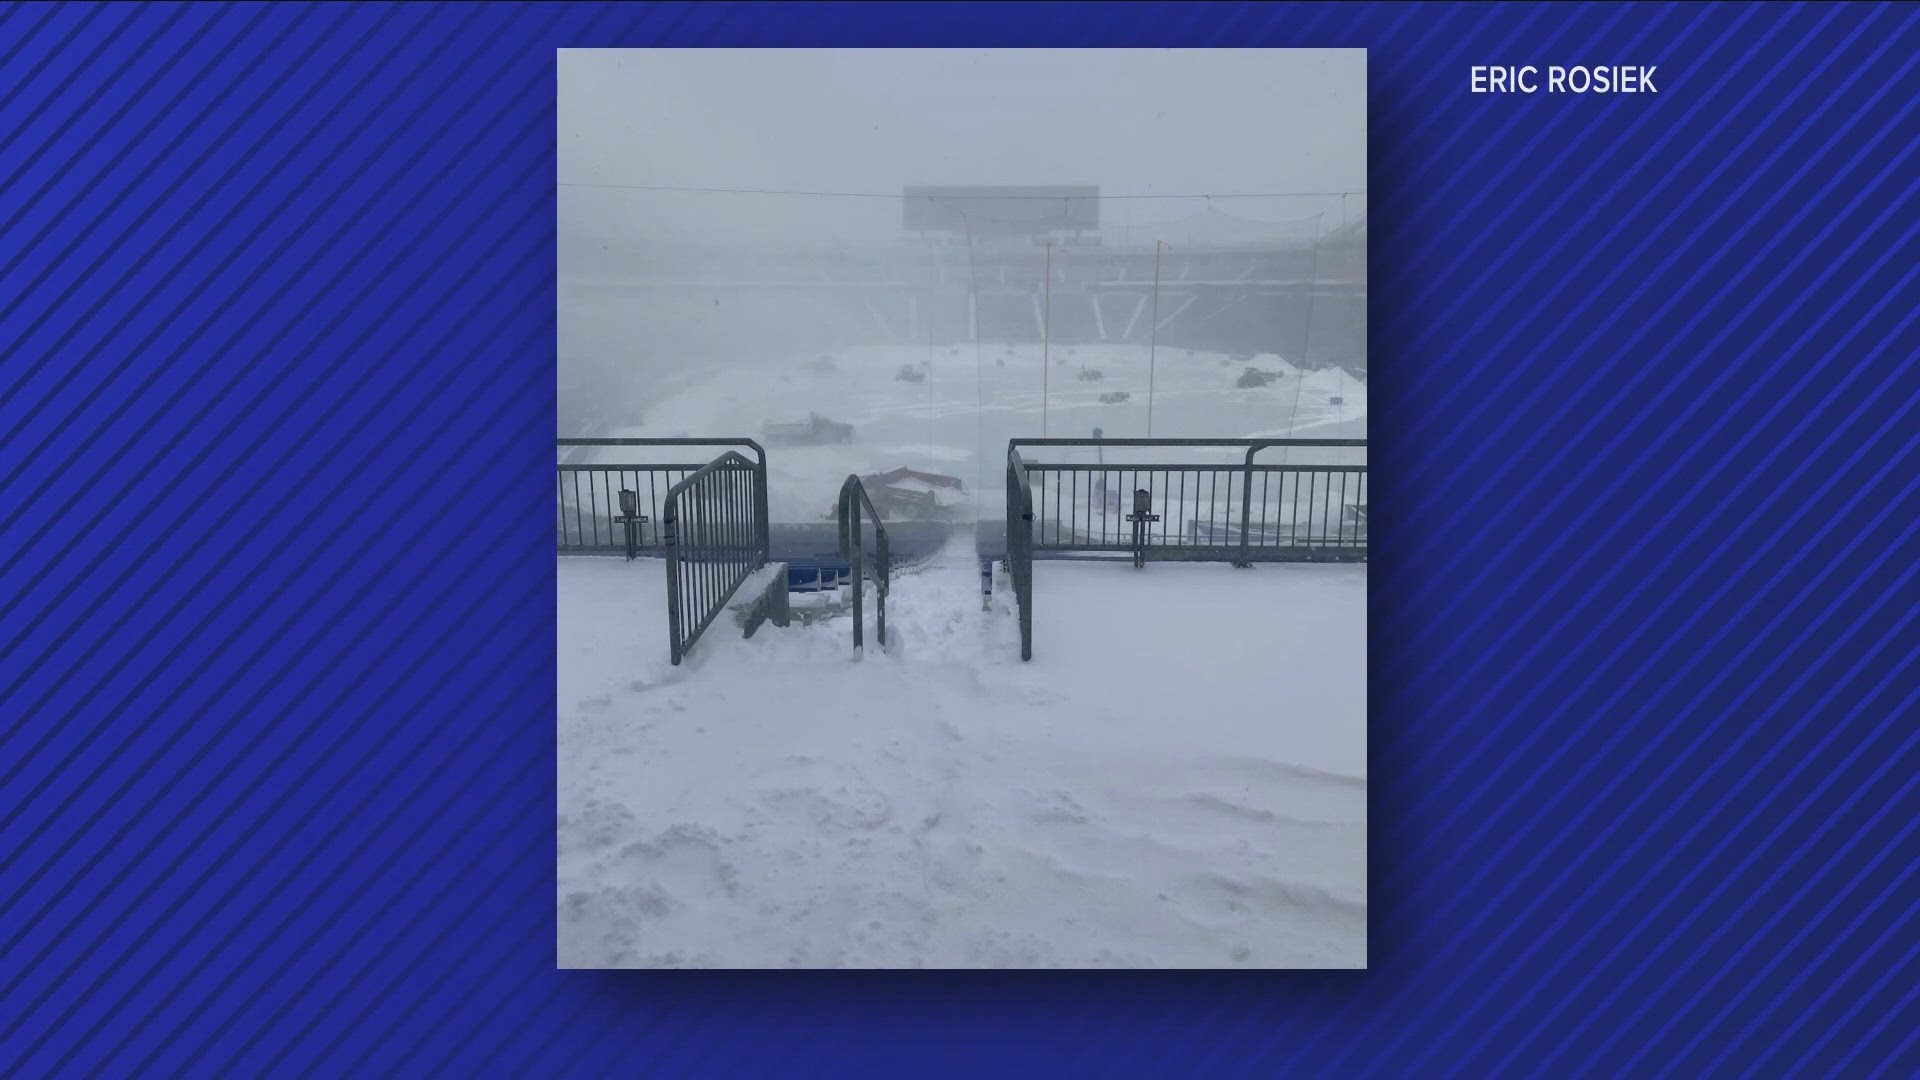 Fans help Buffalo Bills get ready for Monday's playoff game which was postponed due to the storm.